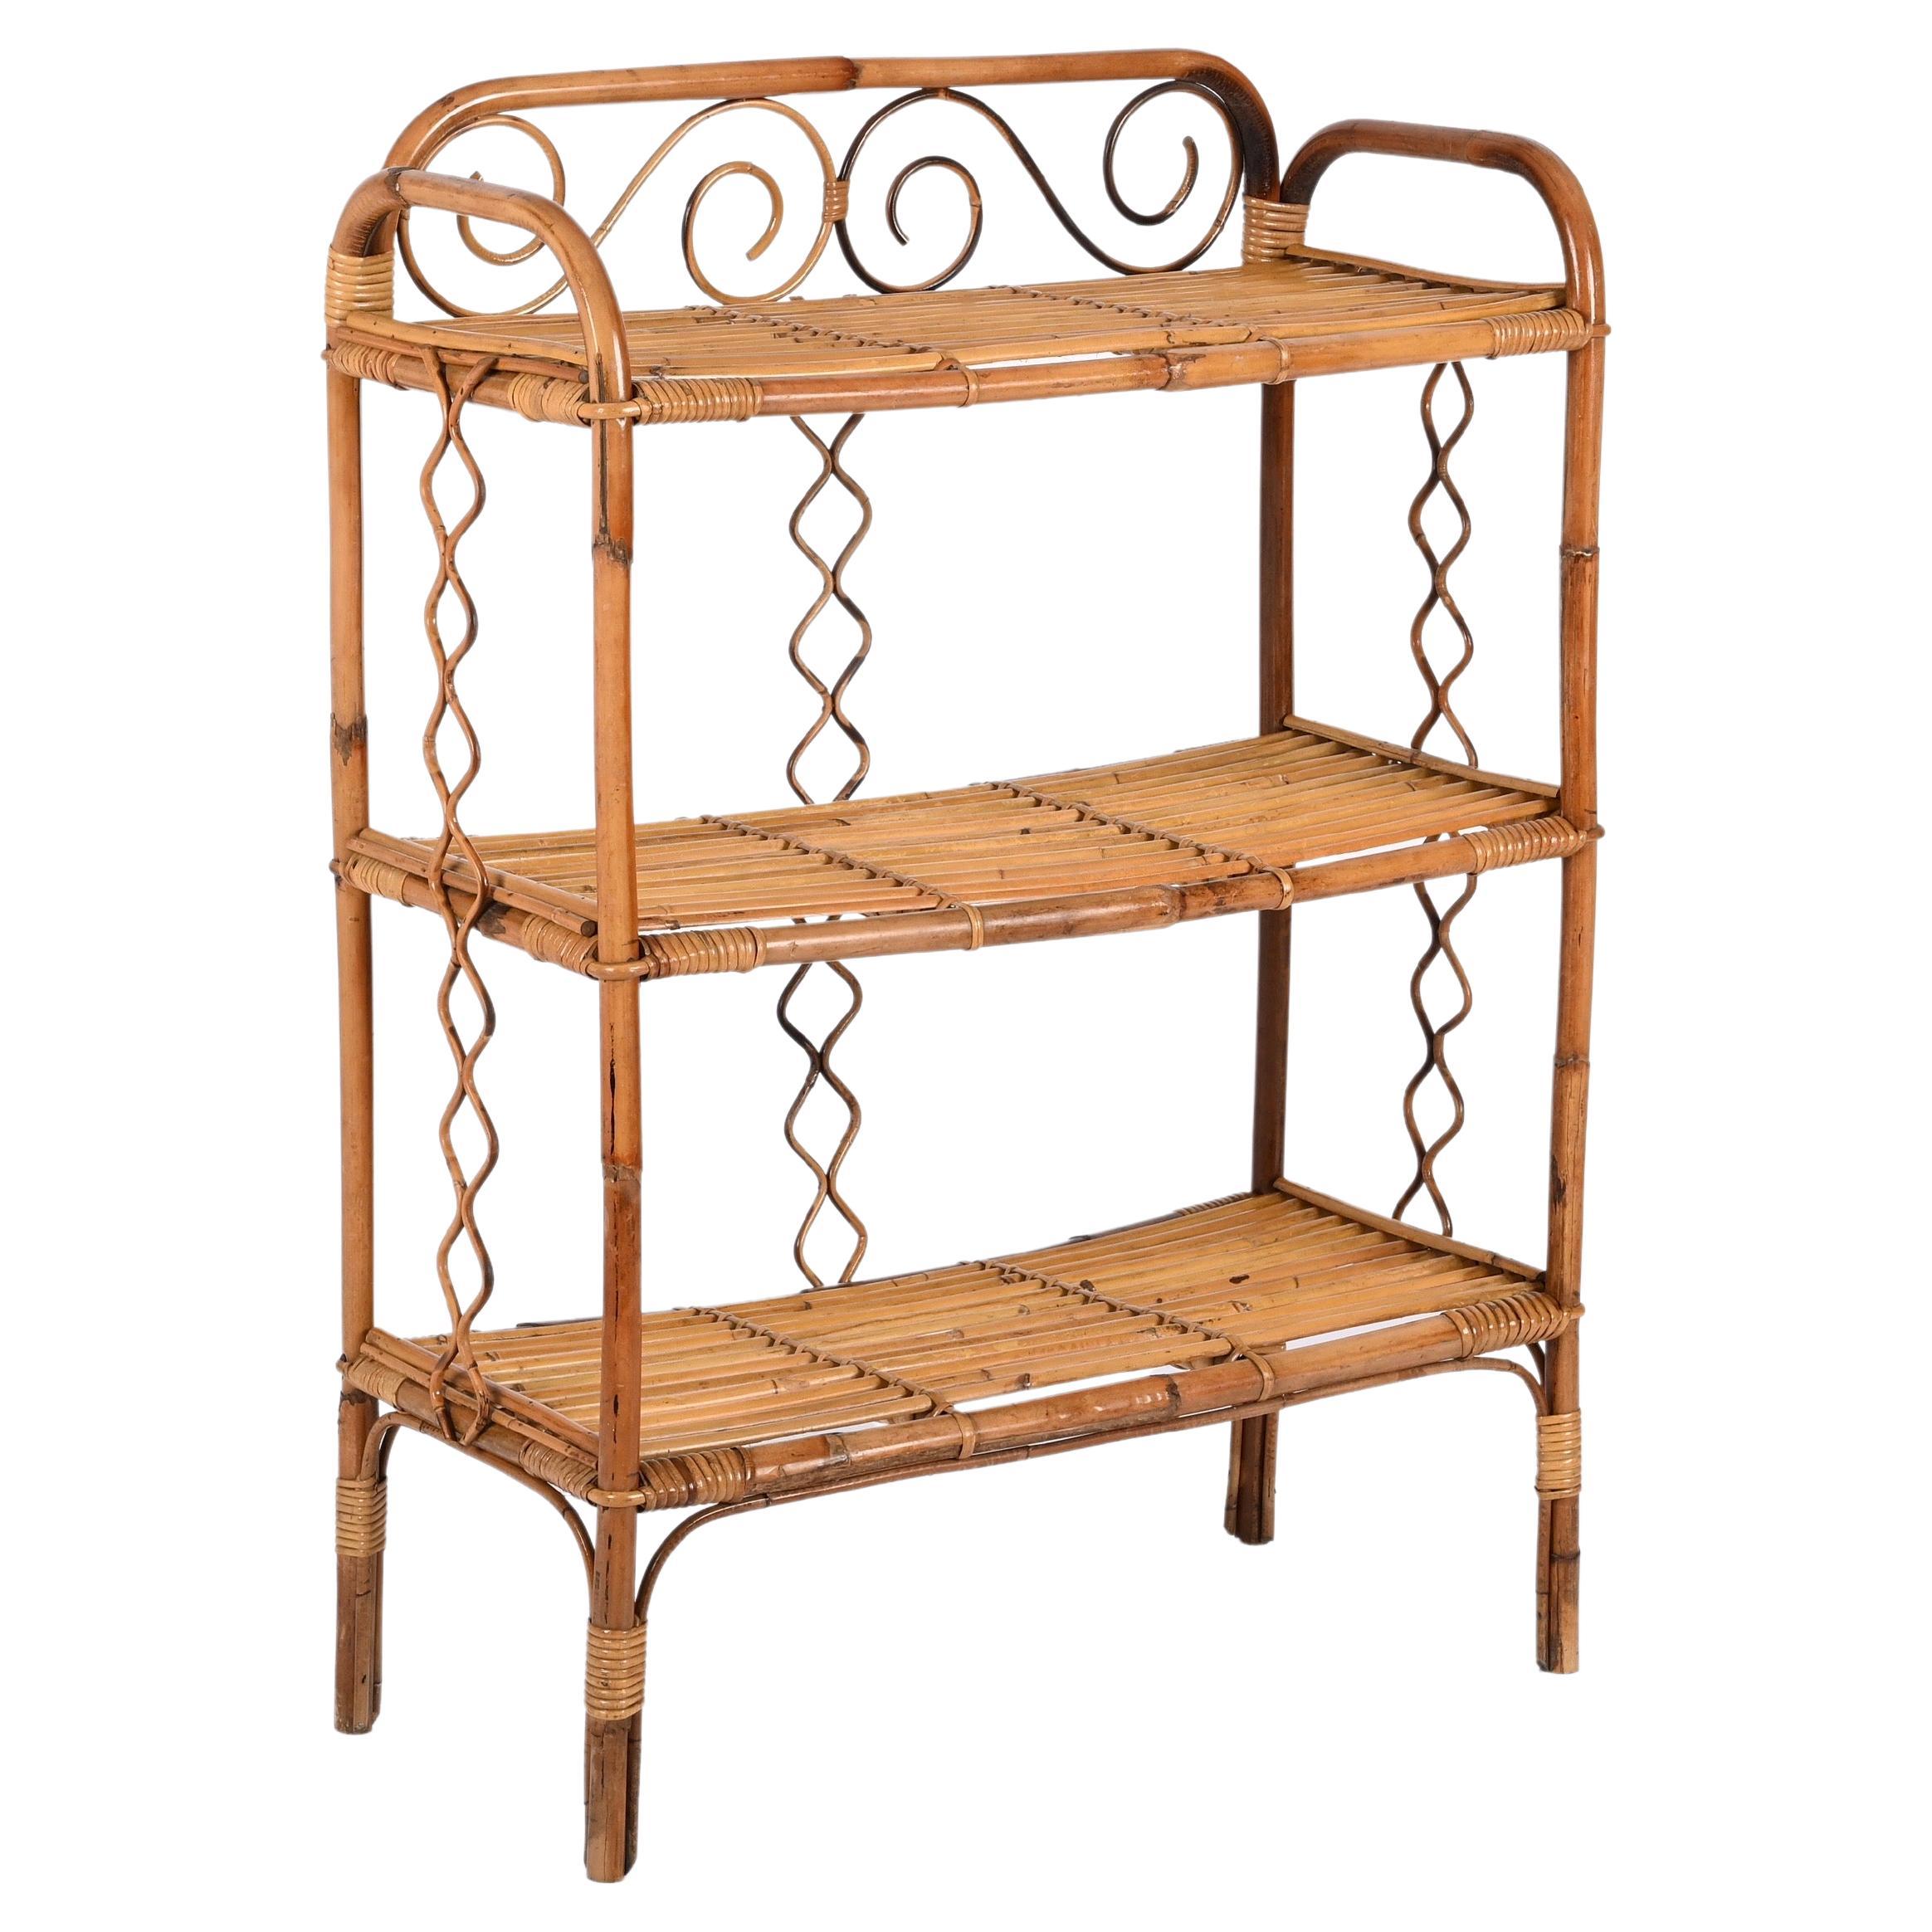 Midcentury Étagère Bamboo and Rattan, Italian Bookcase with Three Shelves, 1970s For Sale